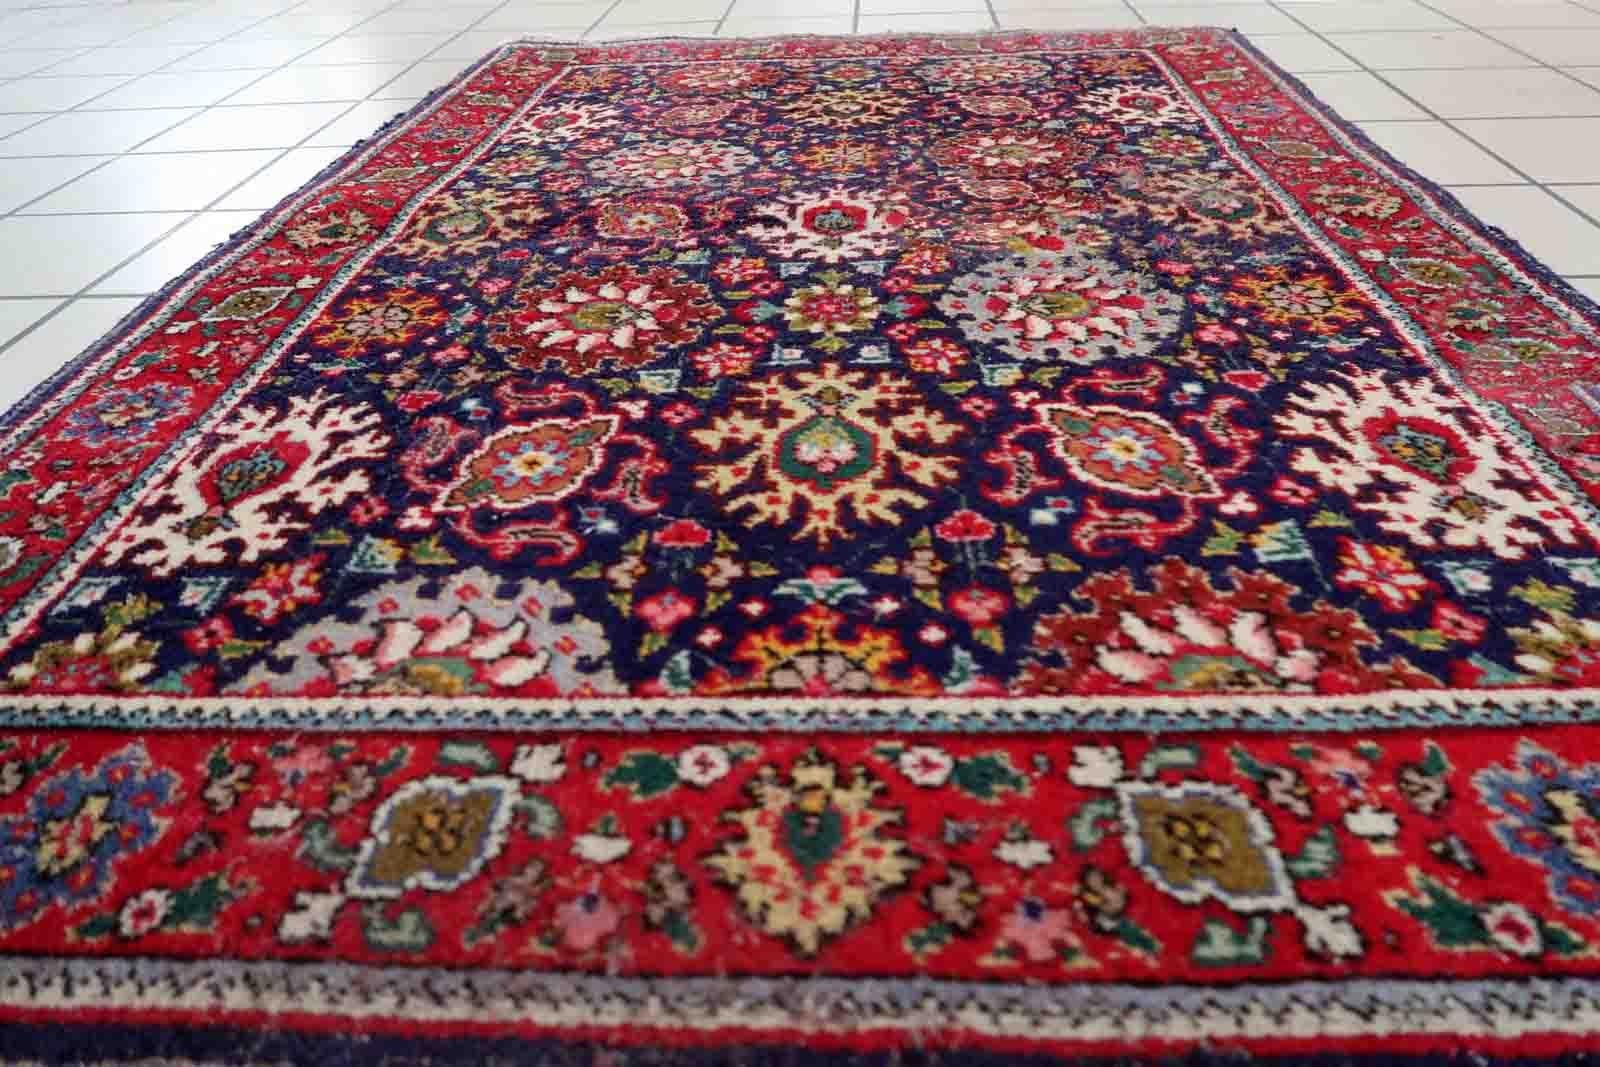 Handmade vintage Tabriz rug in floral design and unusual purple background. The rug is from the middle of 20th century in good condition, it has some old restorations.

-condition: good, some old restorations,

-circa: 1950s,

-size: 3.3' x